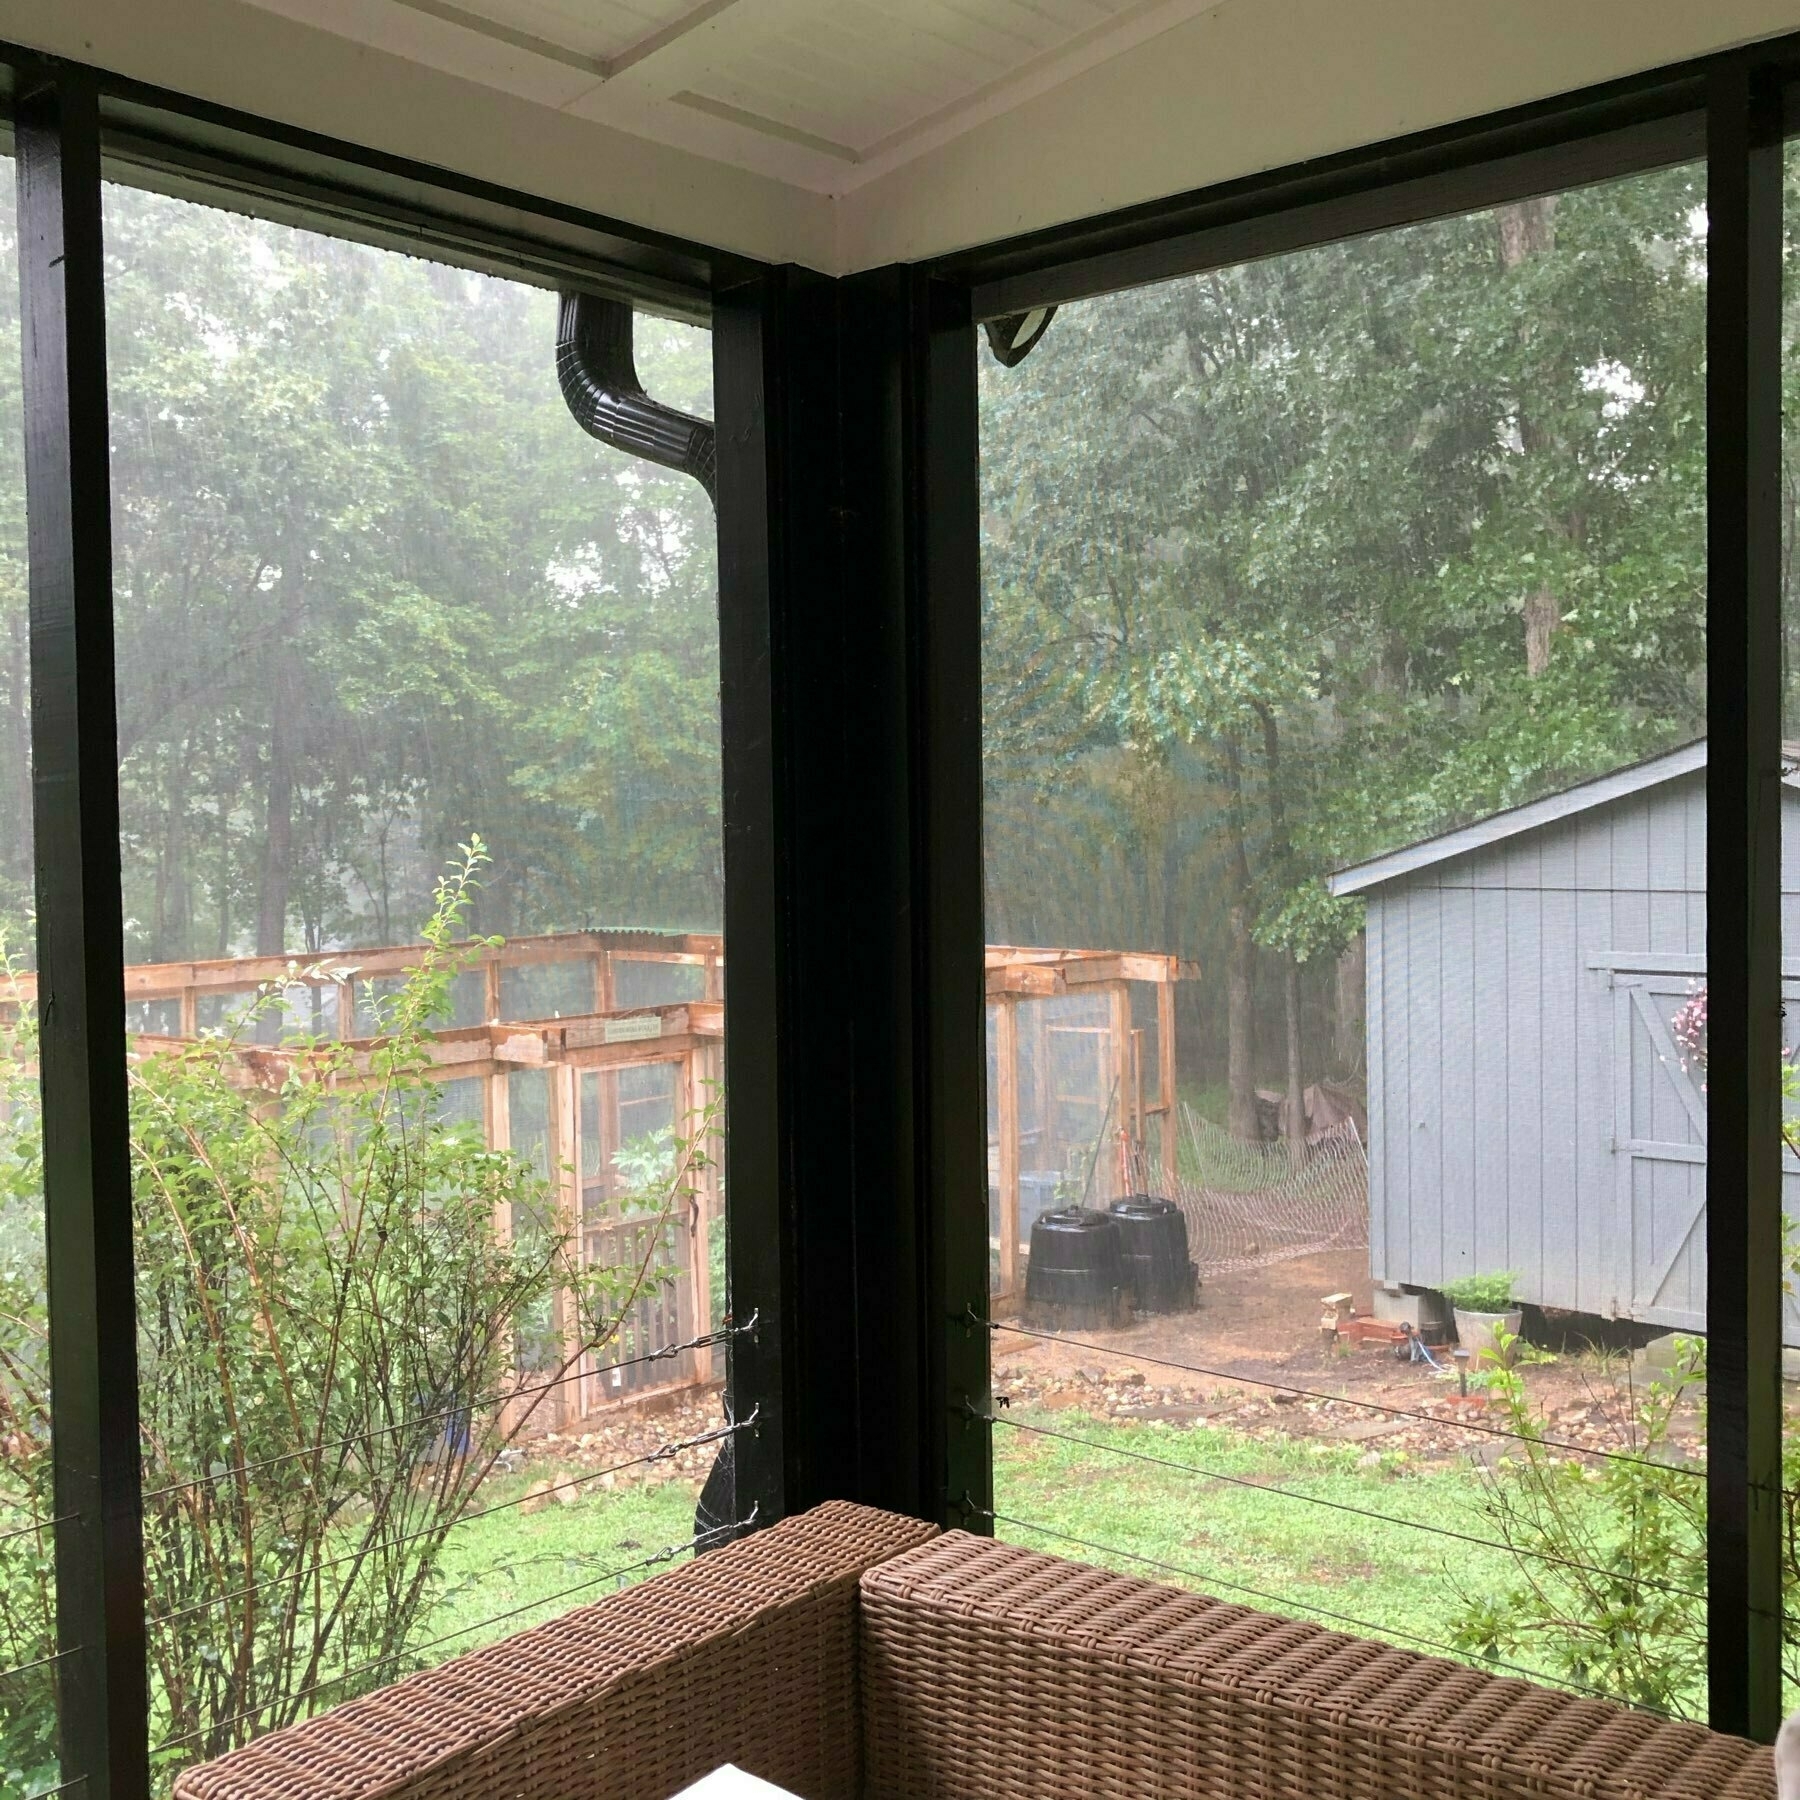 Rain storm from back porch